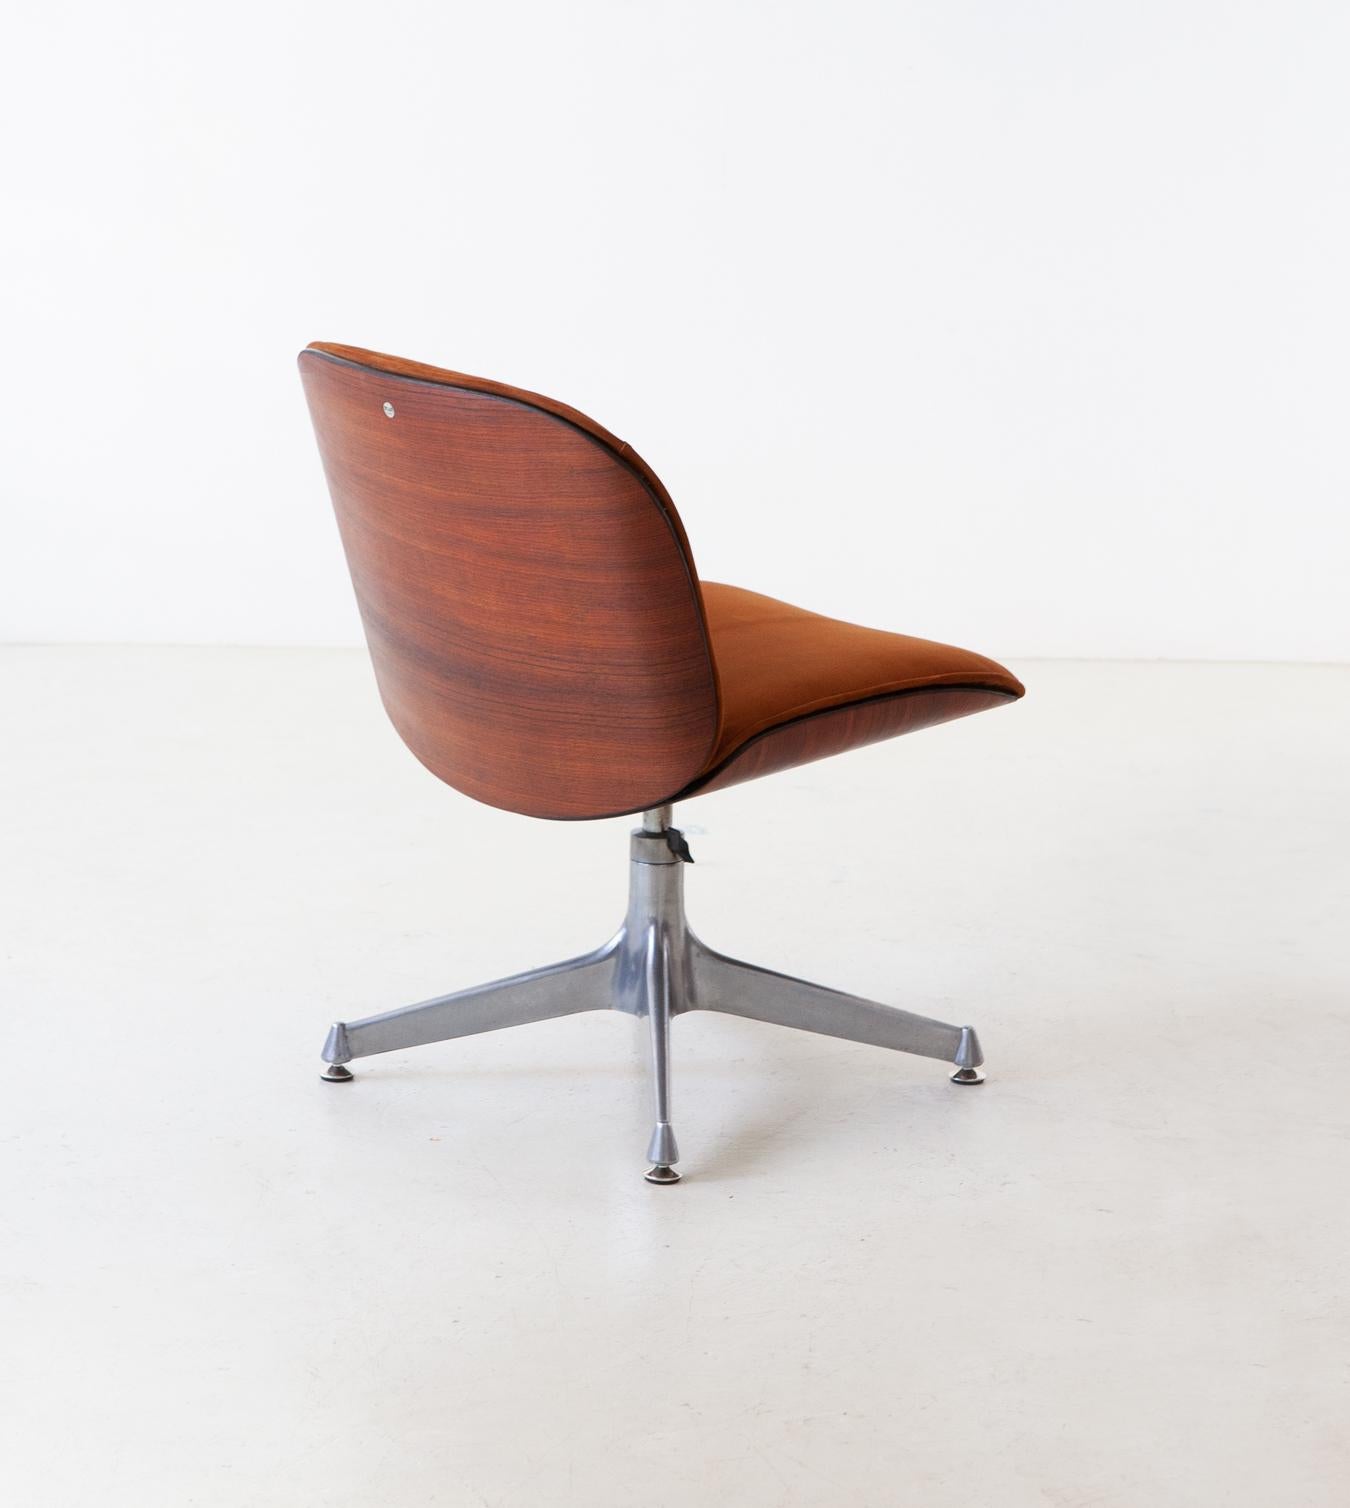 Modernist swivel chair designed by Ico Parisi and produced by M.I.M. (Mobili Italiani Moderni) Roma, Italy

This is the 1st series from the 1950s.

Fully restored curved rosewood frame with a deep sanding of the original finishing , then a light